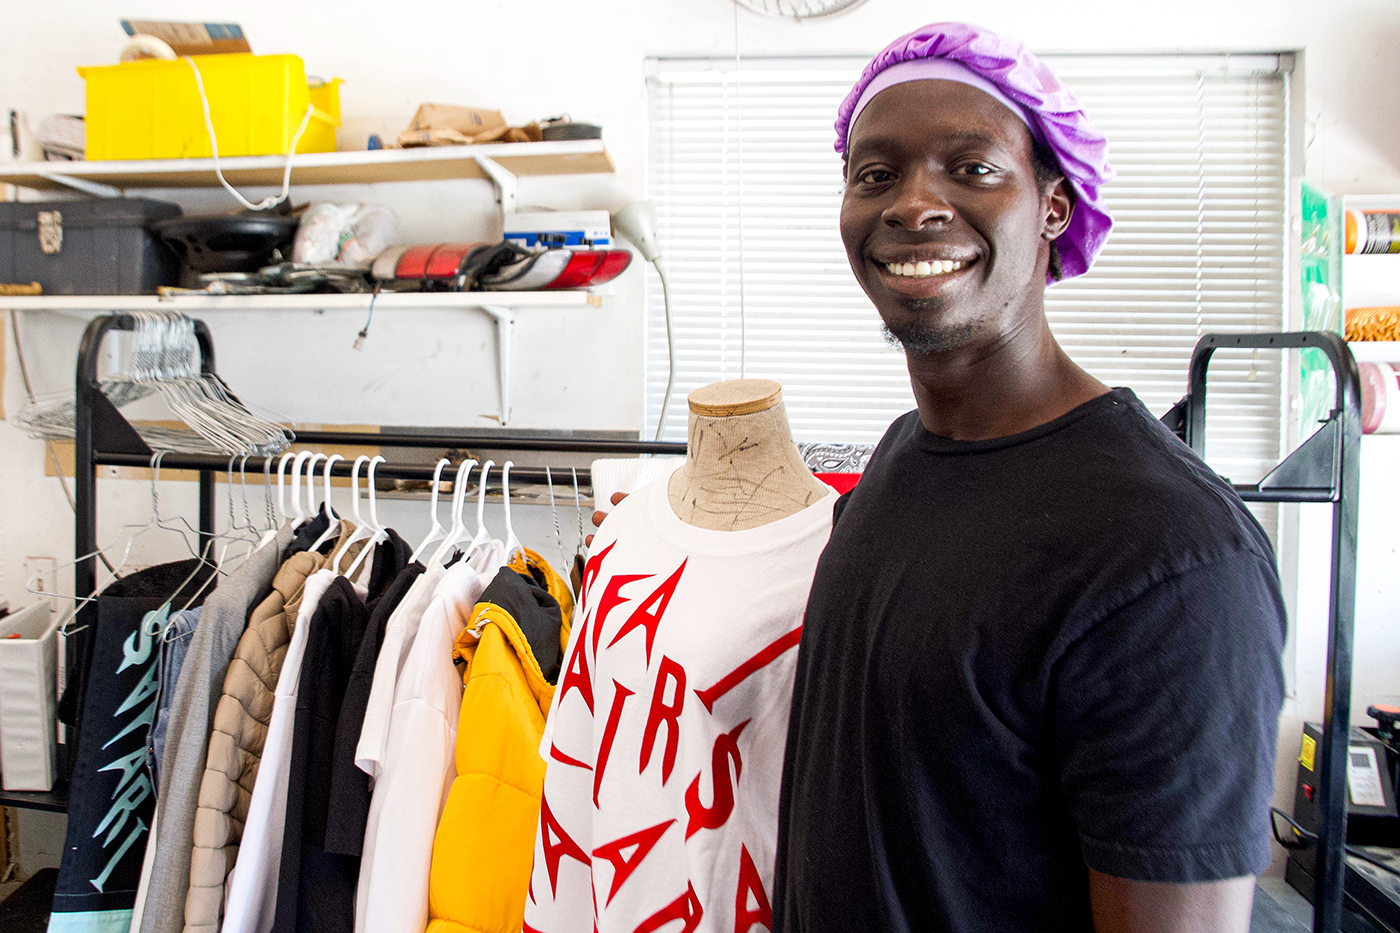 South Sudanese fashion designer and brand owner Jokie Riak makes custom clothing with repurposed and quality fabrics, bringing his manifestations to life.